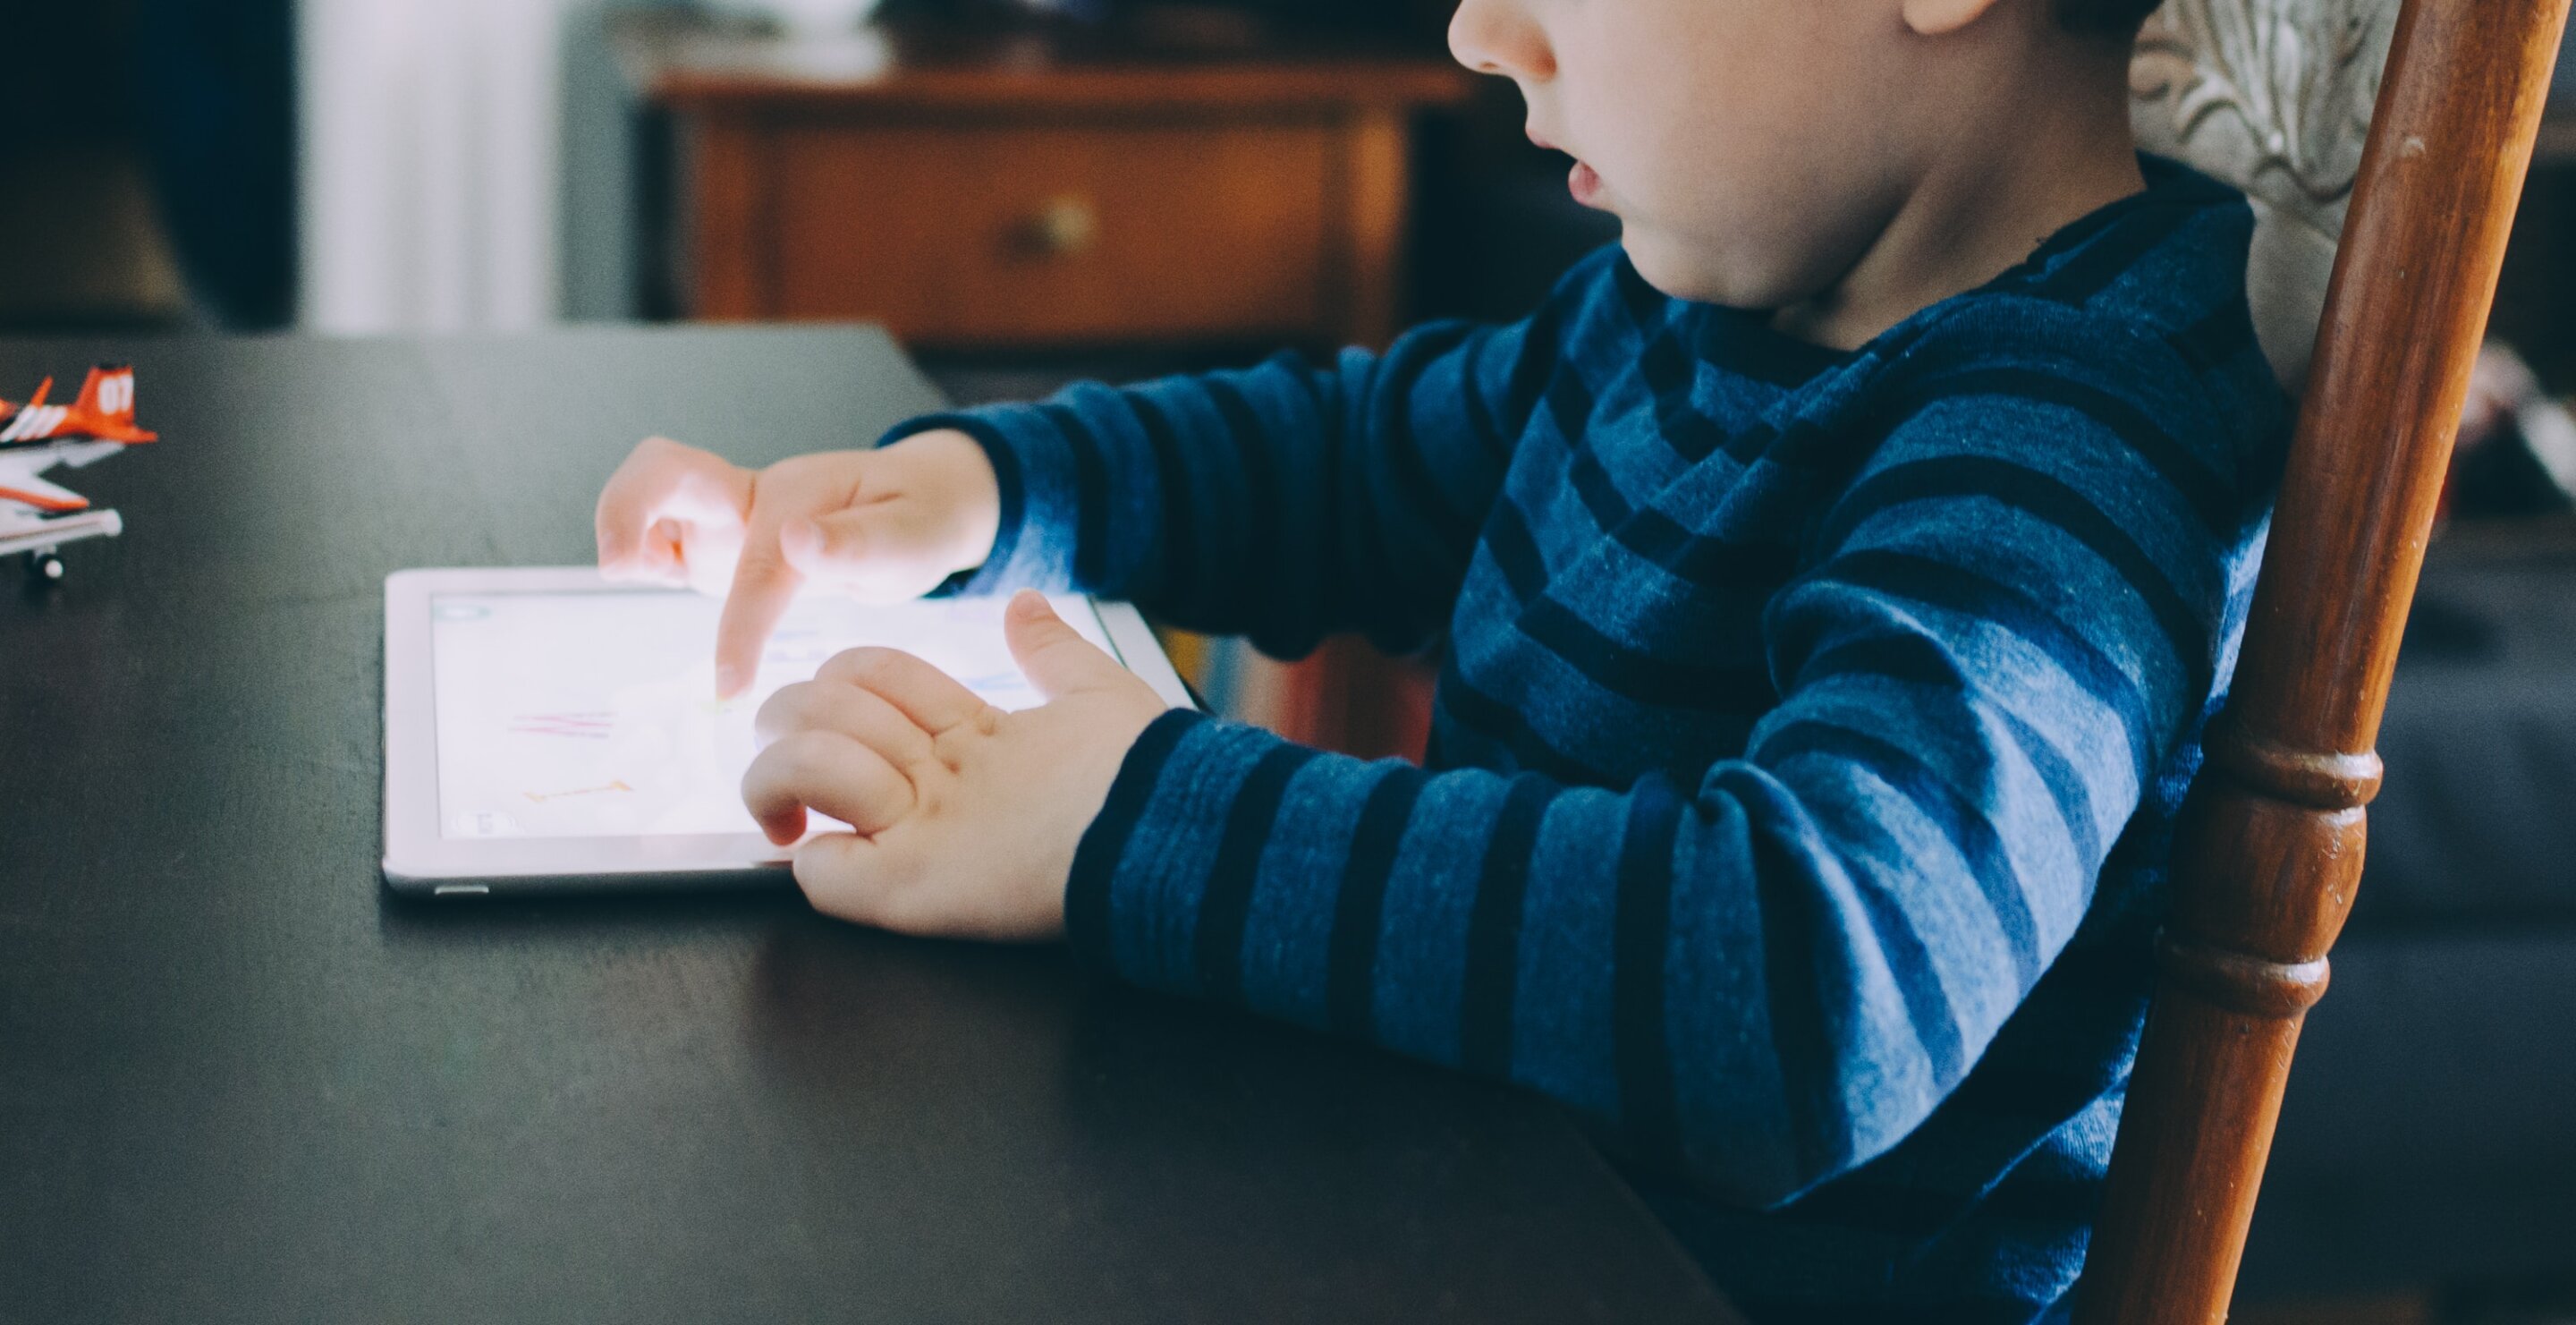 Lengthy screen time associated with childhood development delays